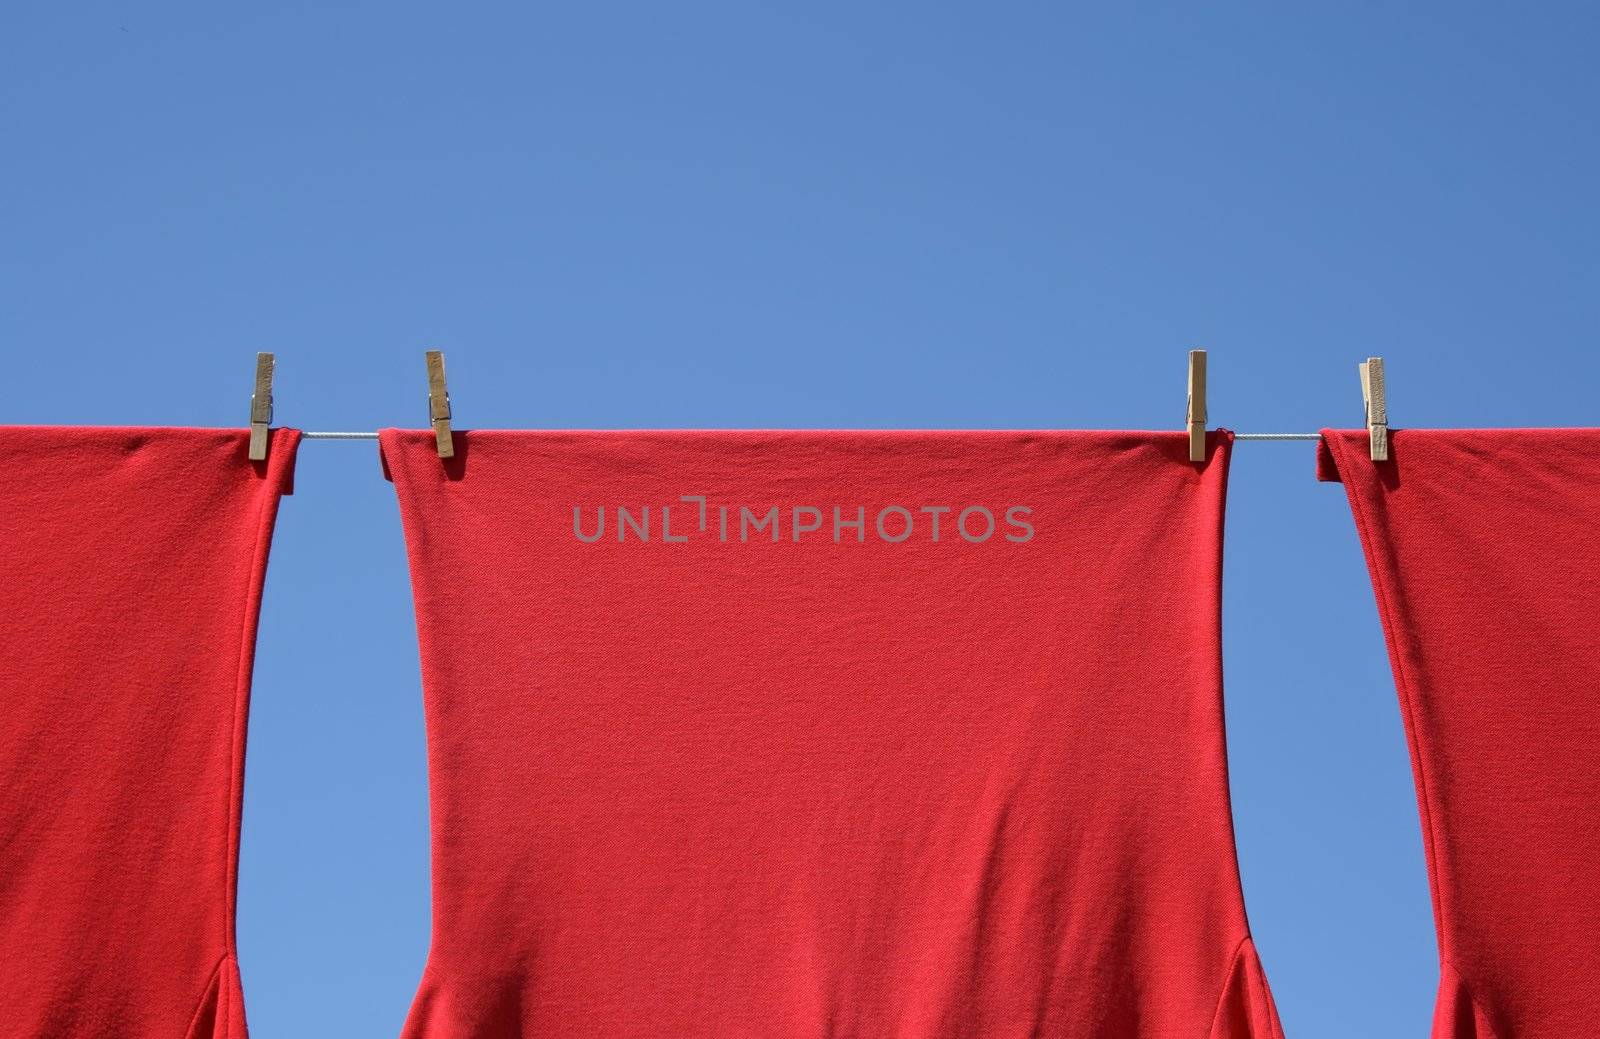 Red corporate t-shirts which hang to dry on a clothes-line.